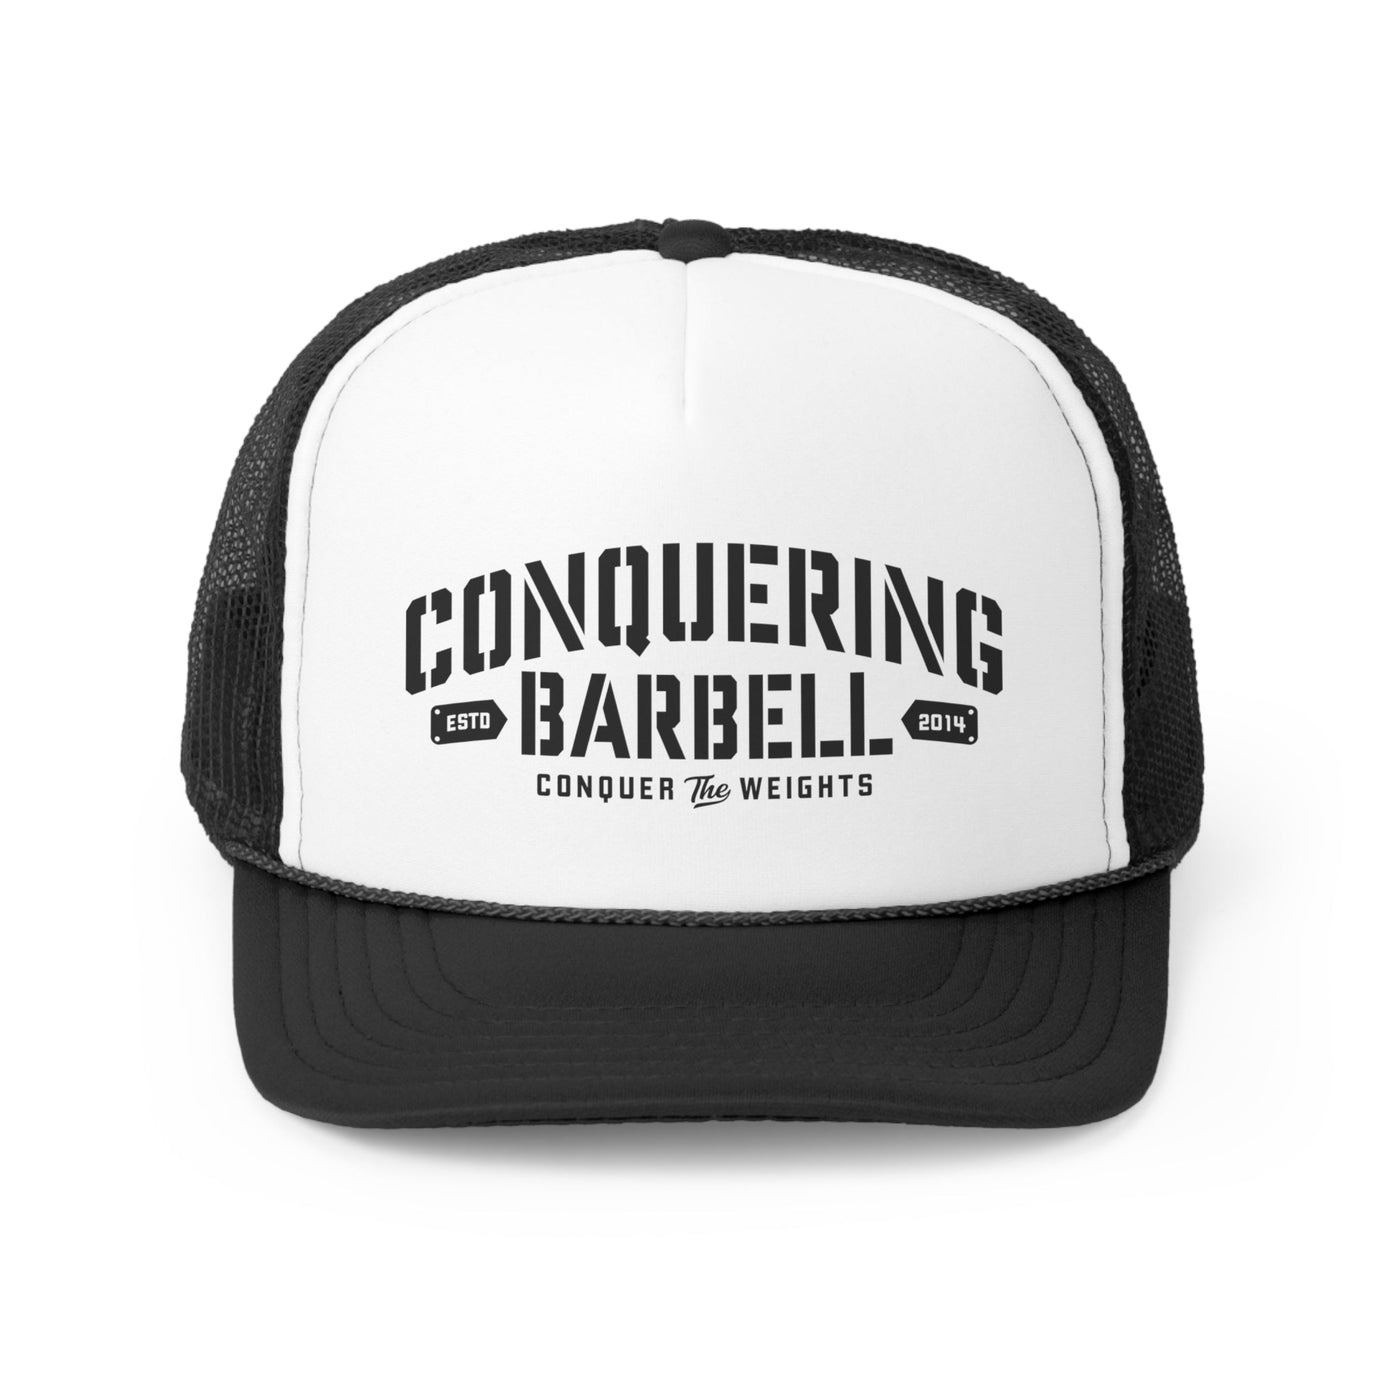 Standard Issue - Black/White Trucker Cap - Conquering Barbell